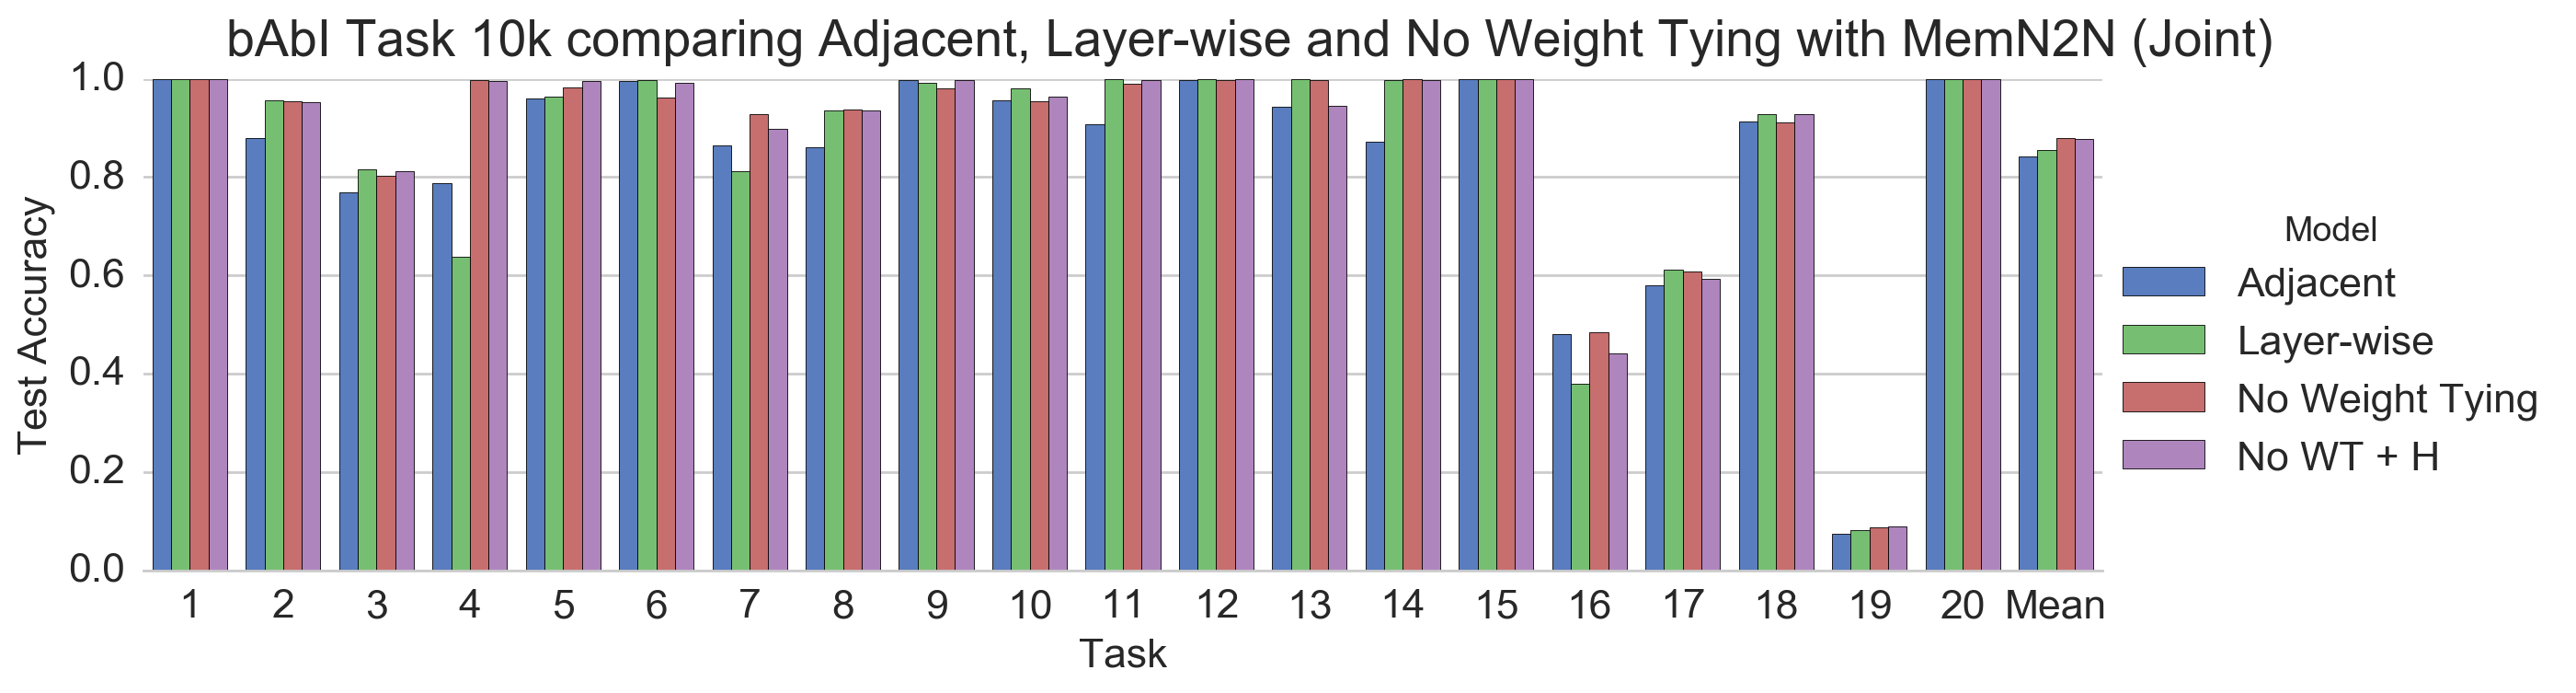 bAbI Task 10k comparing Adjacent, Layer-wise and No Weight Tying with MemN2N (Joint)